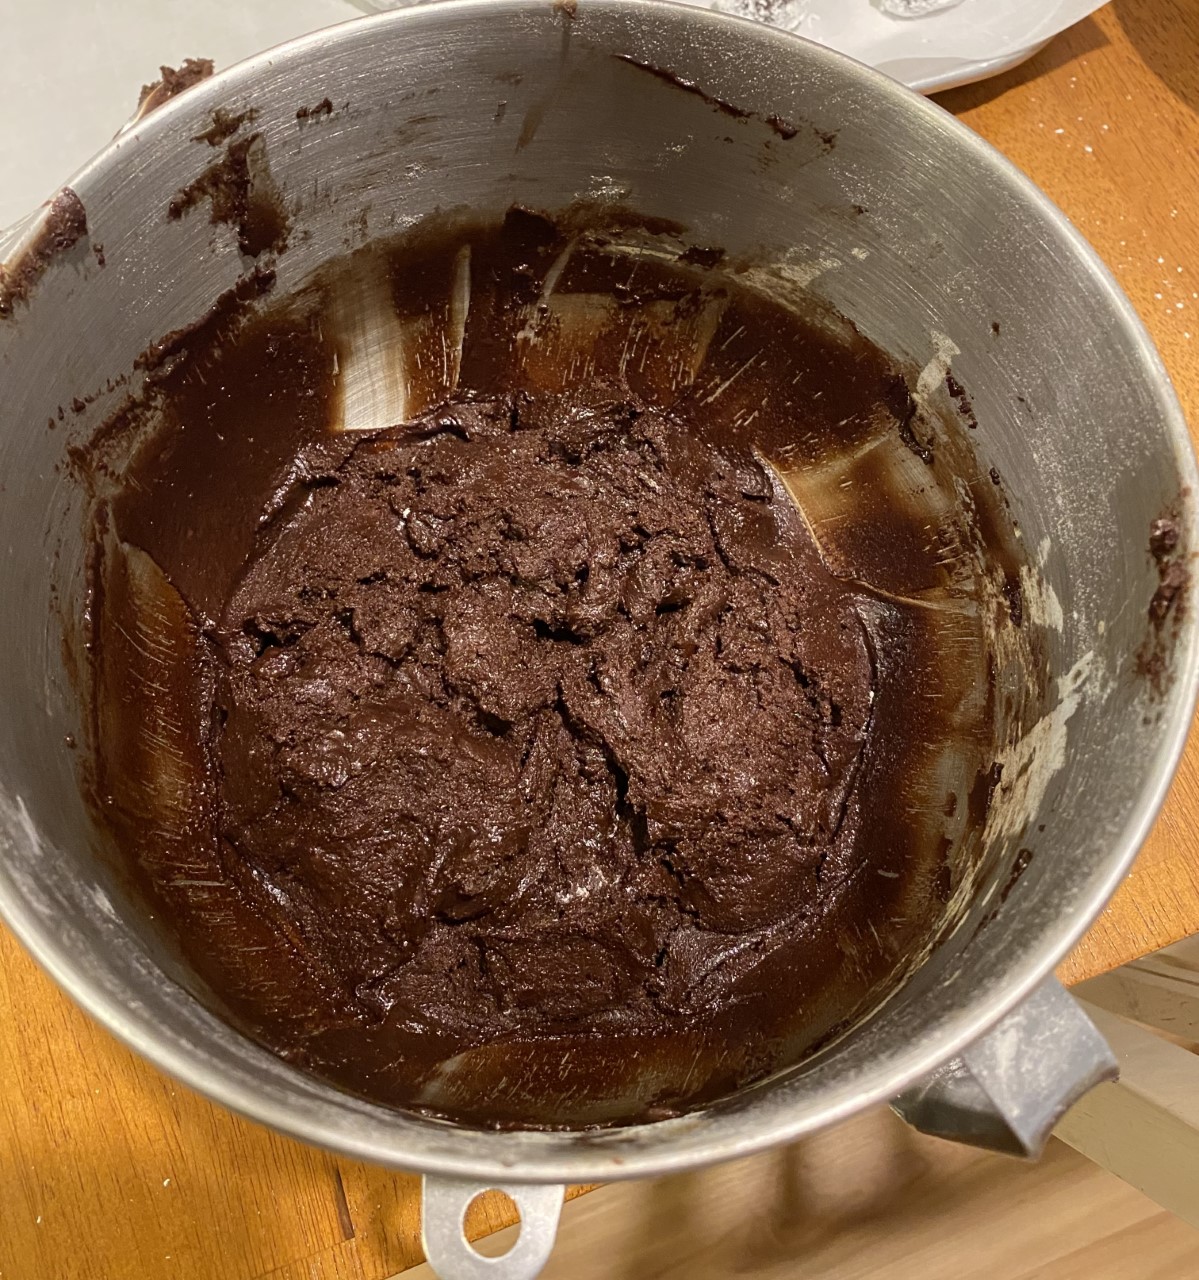 Inside a large, stainless steel mixing bowl is a fudgey cookie dough